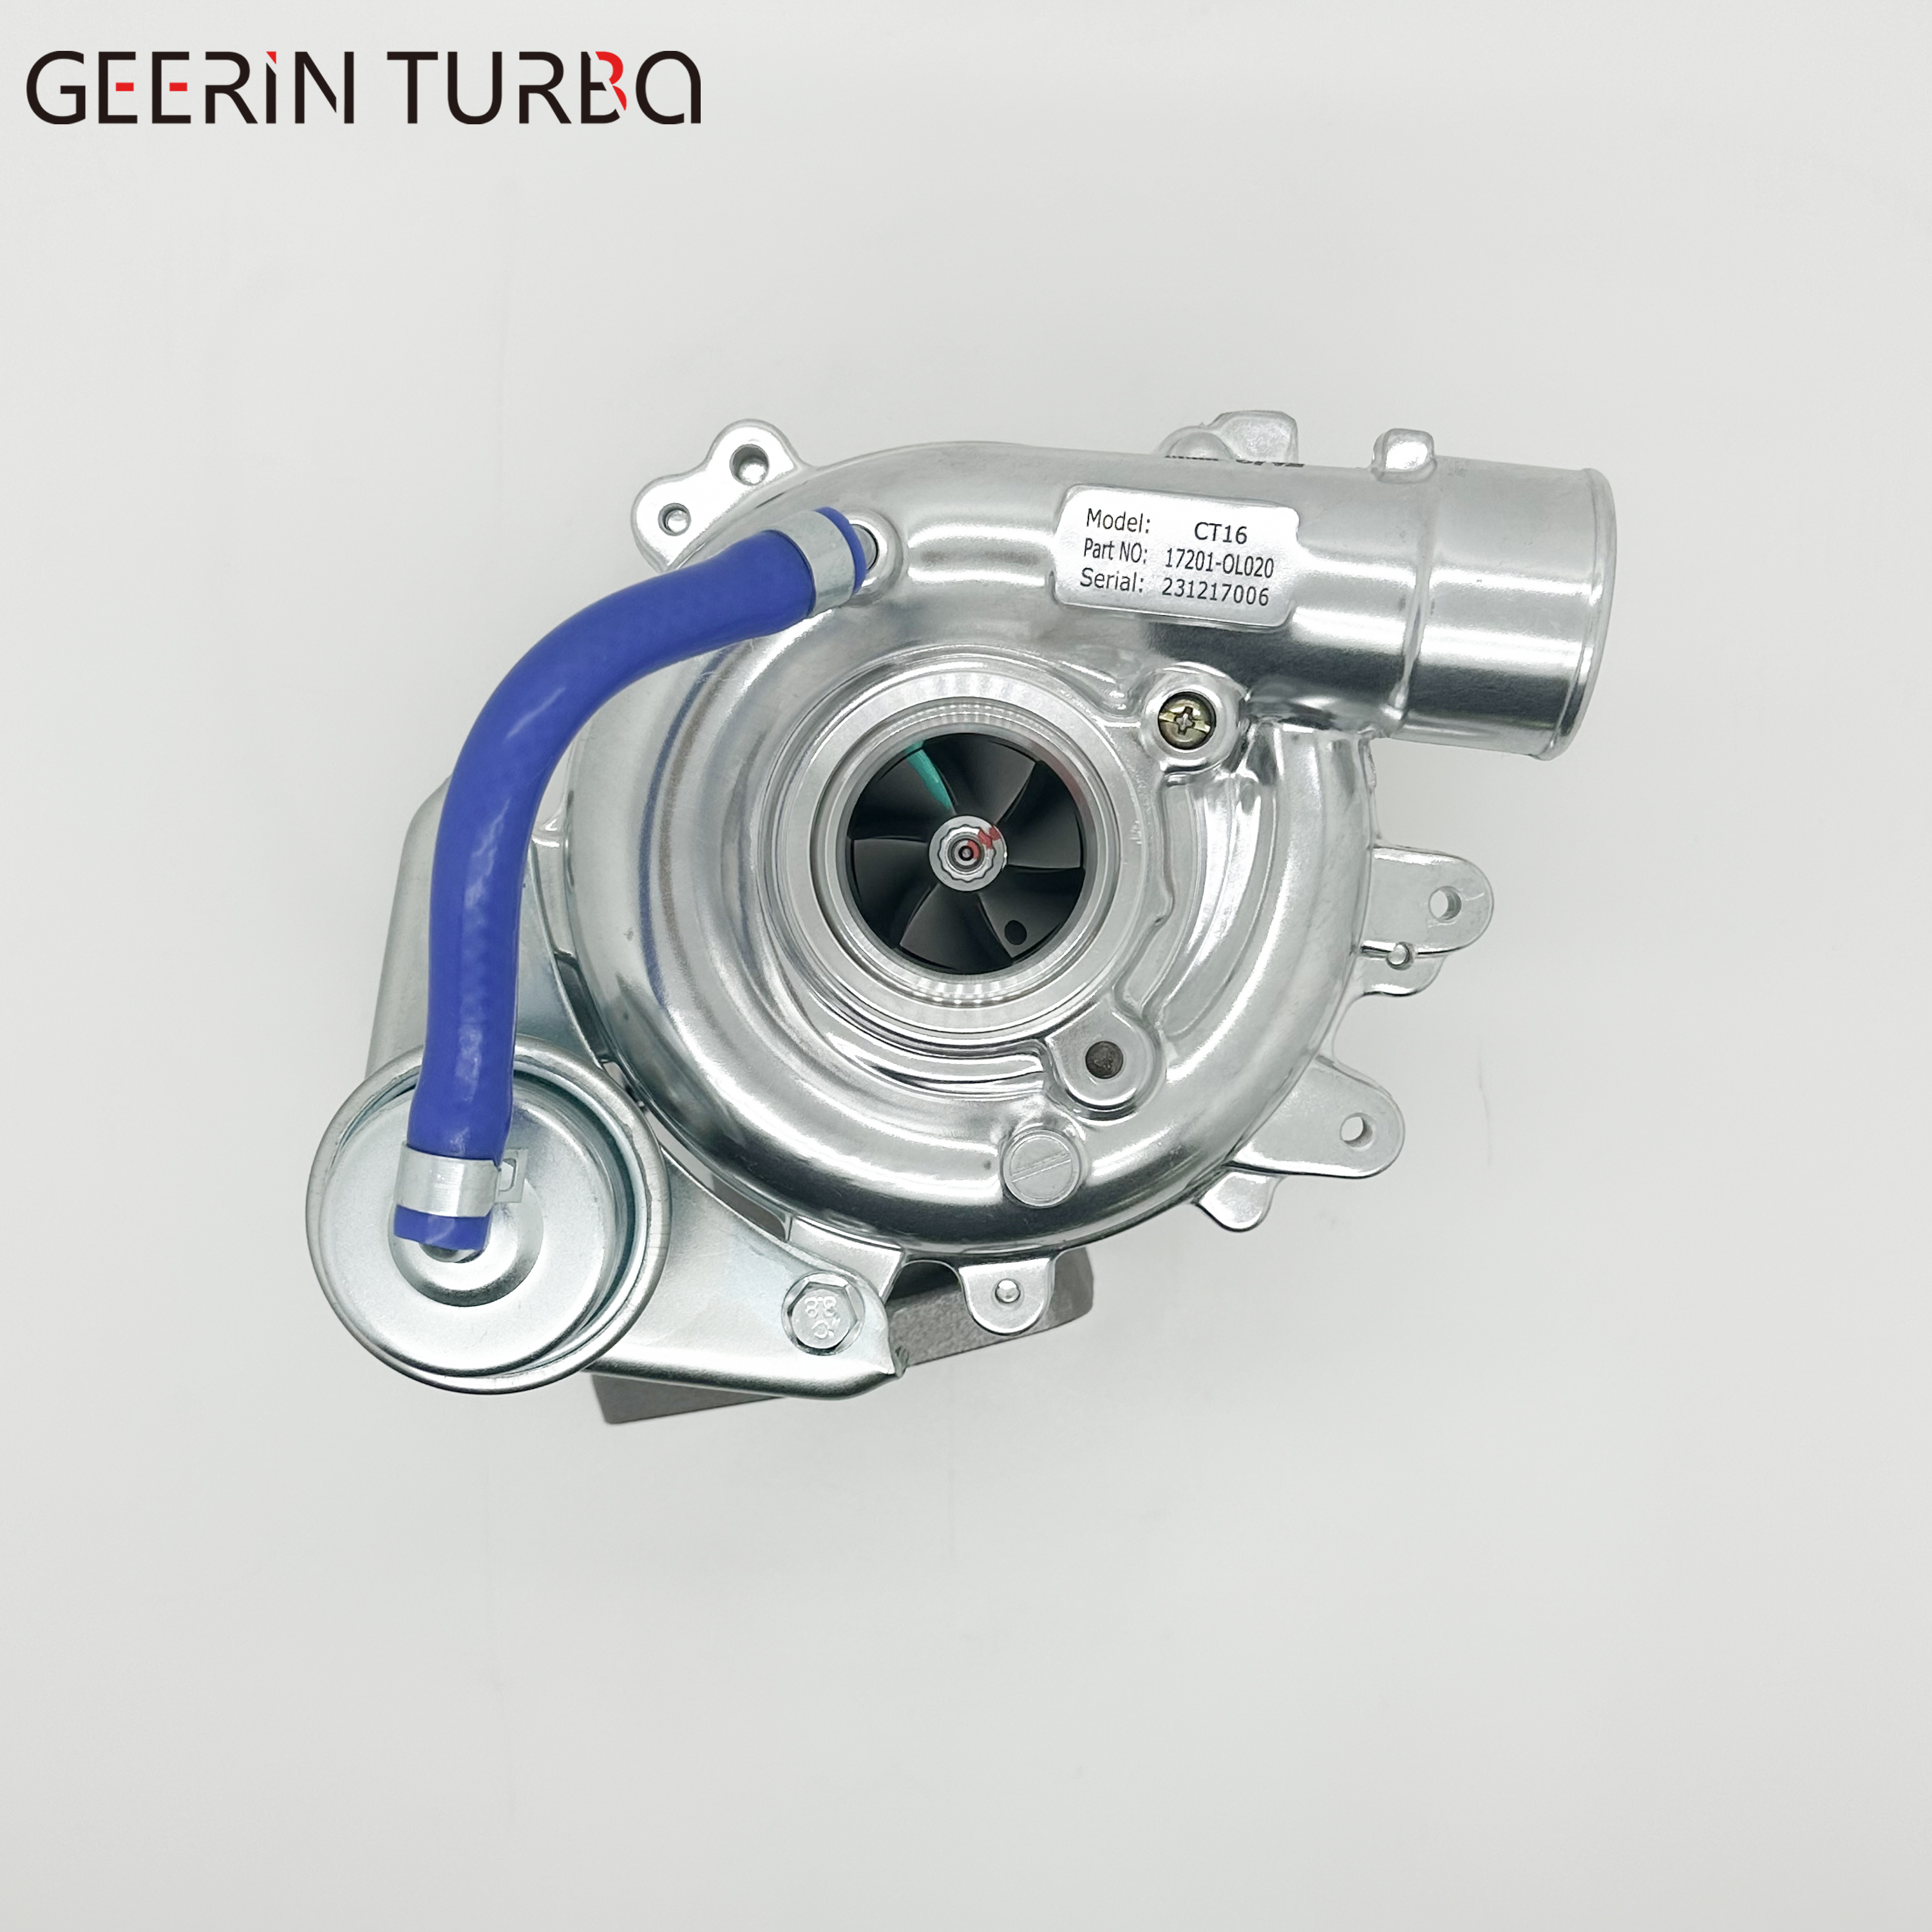 CT16 17201-OL020 High Quality Turbo For Toyota Hiace Hilux 2.5 D4D Factory